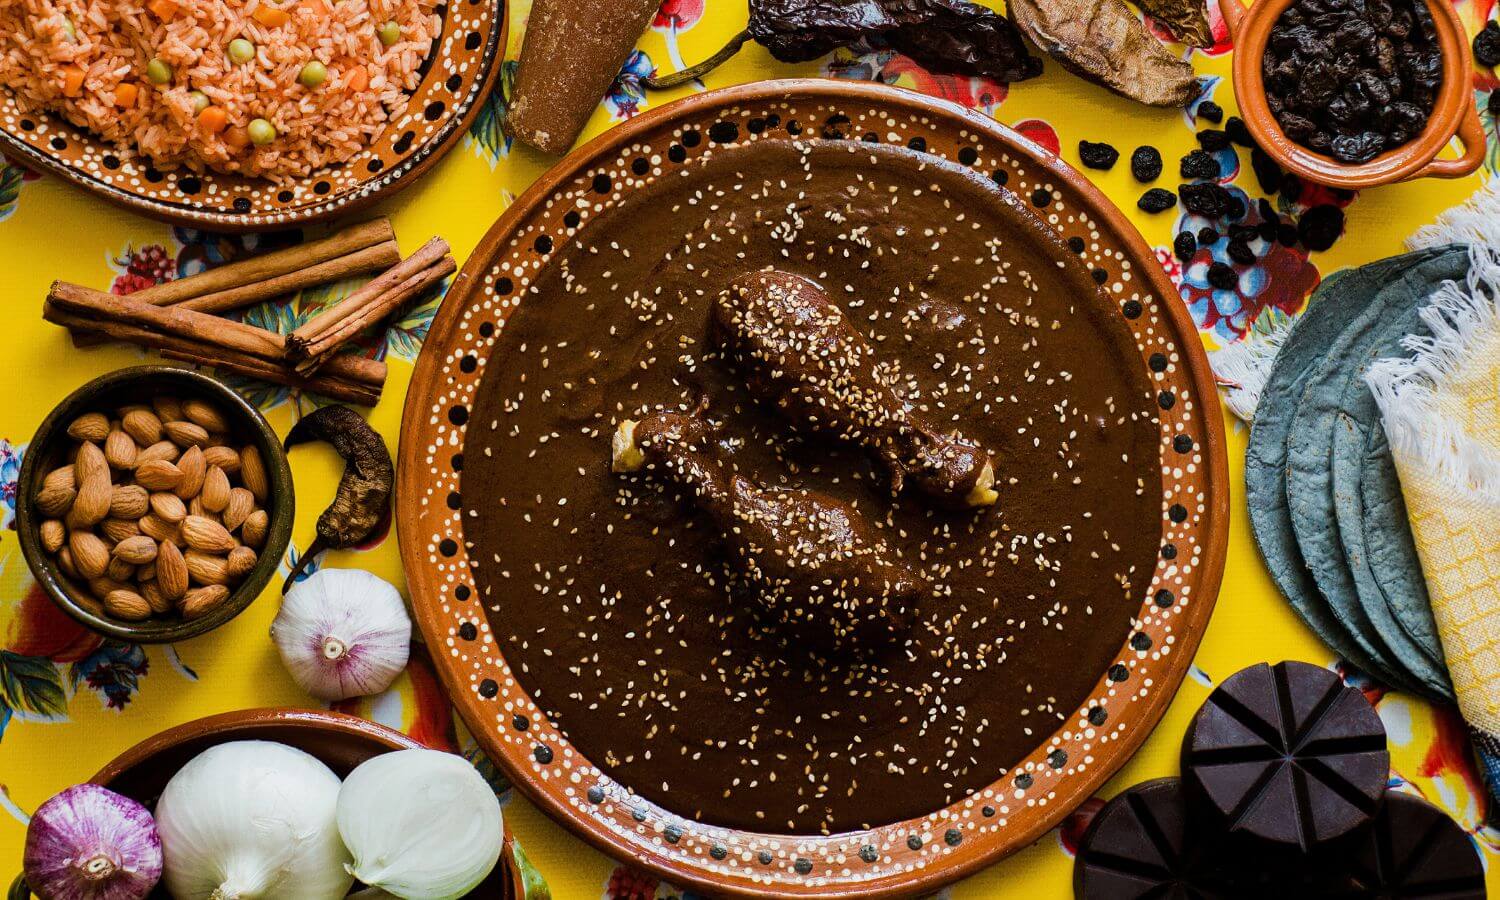 A platter of Chicken Mole surrounded by some of the ingredients at the Feria del Mole Poblano in Puebla